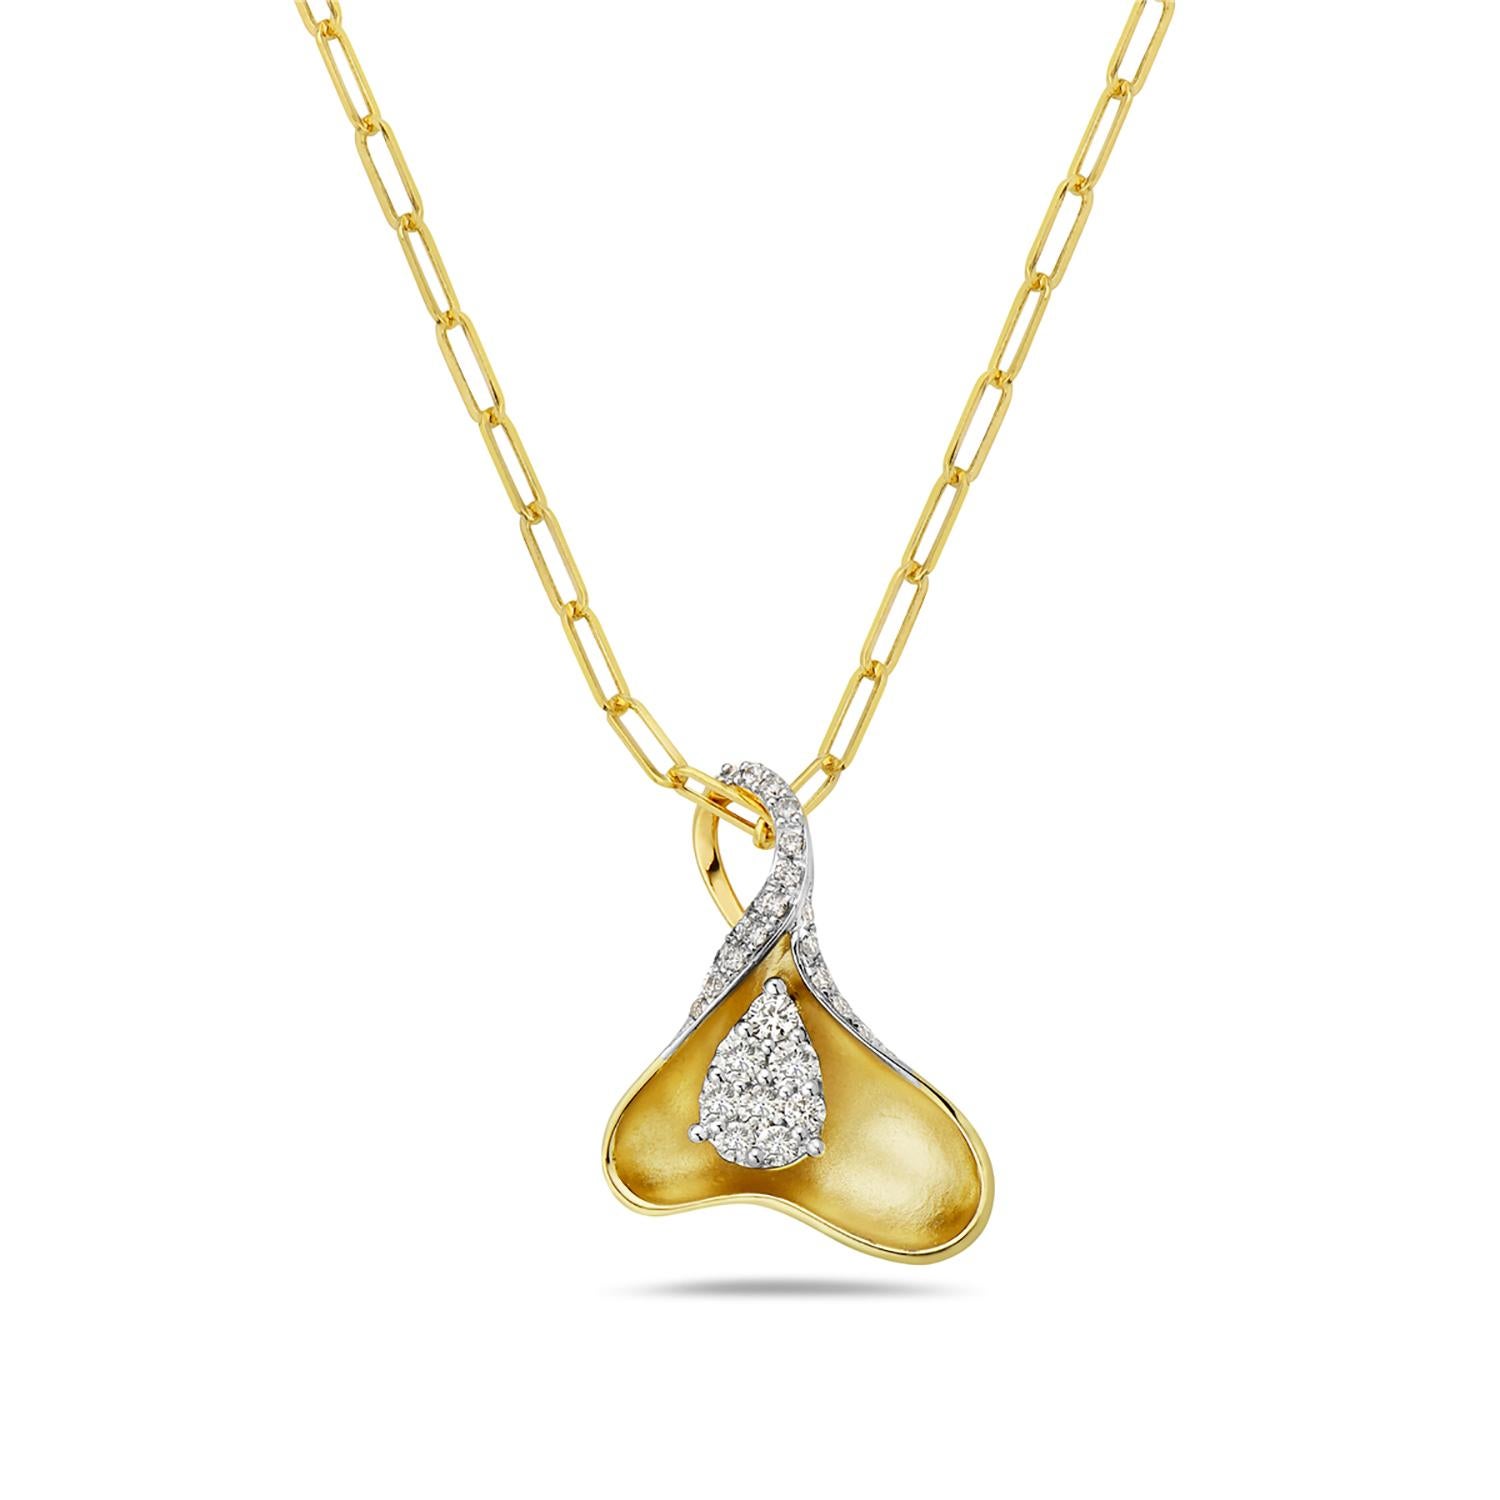 Curved Petal Shaped Pendant with Halo Diamonds Made in 14k Yellow Gold In New Condition For Sale In New York, NY